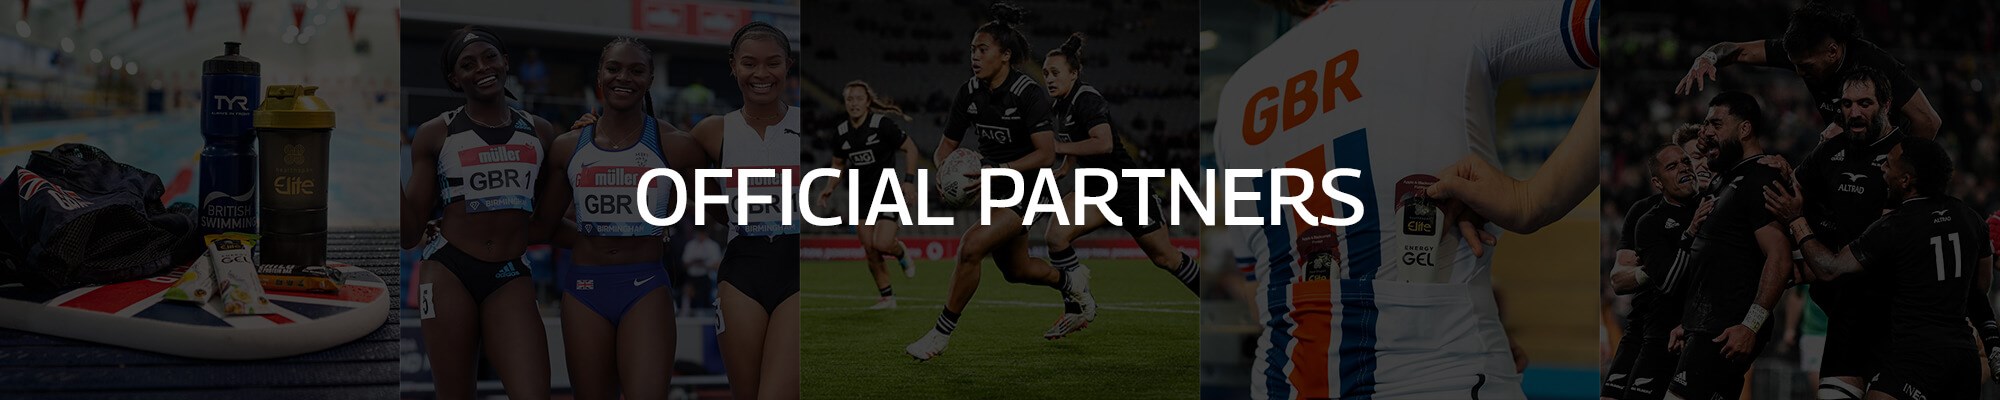 Official Partners